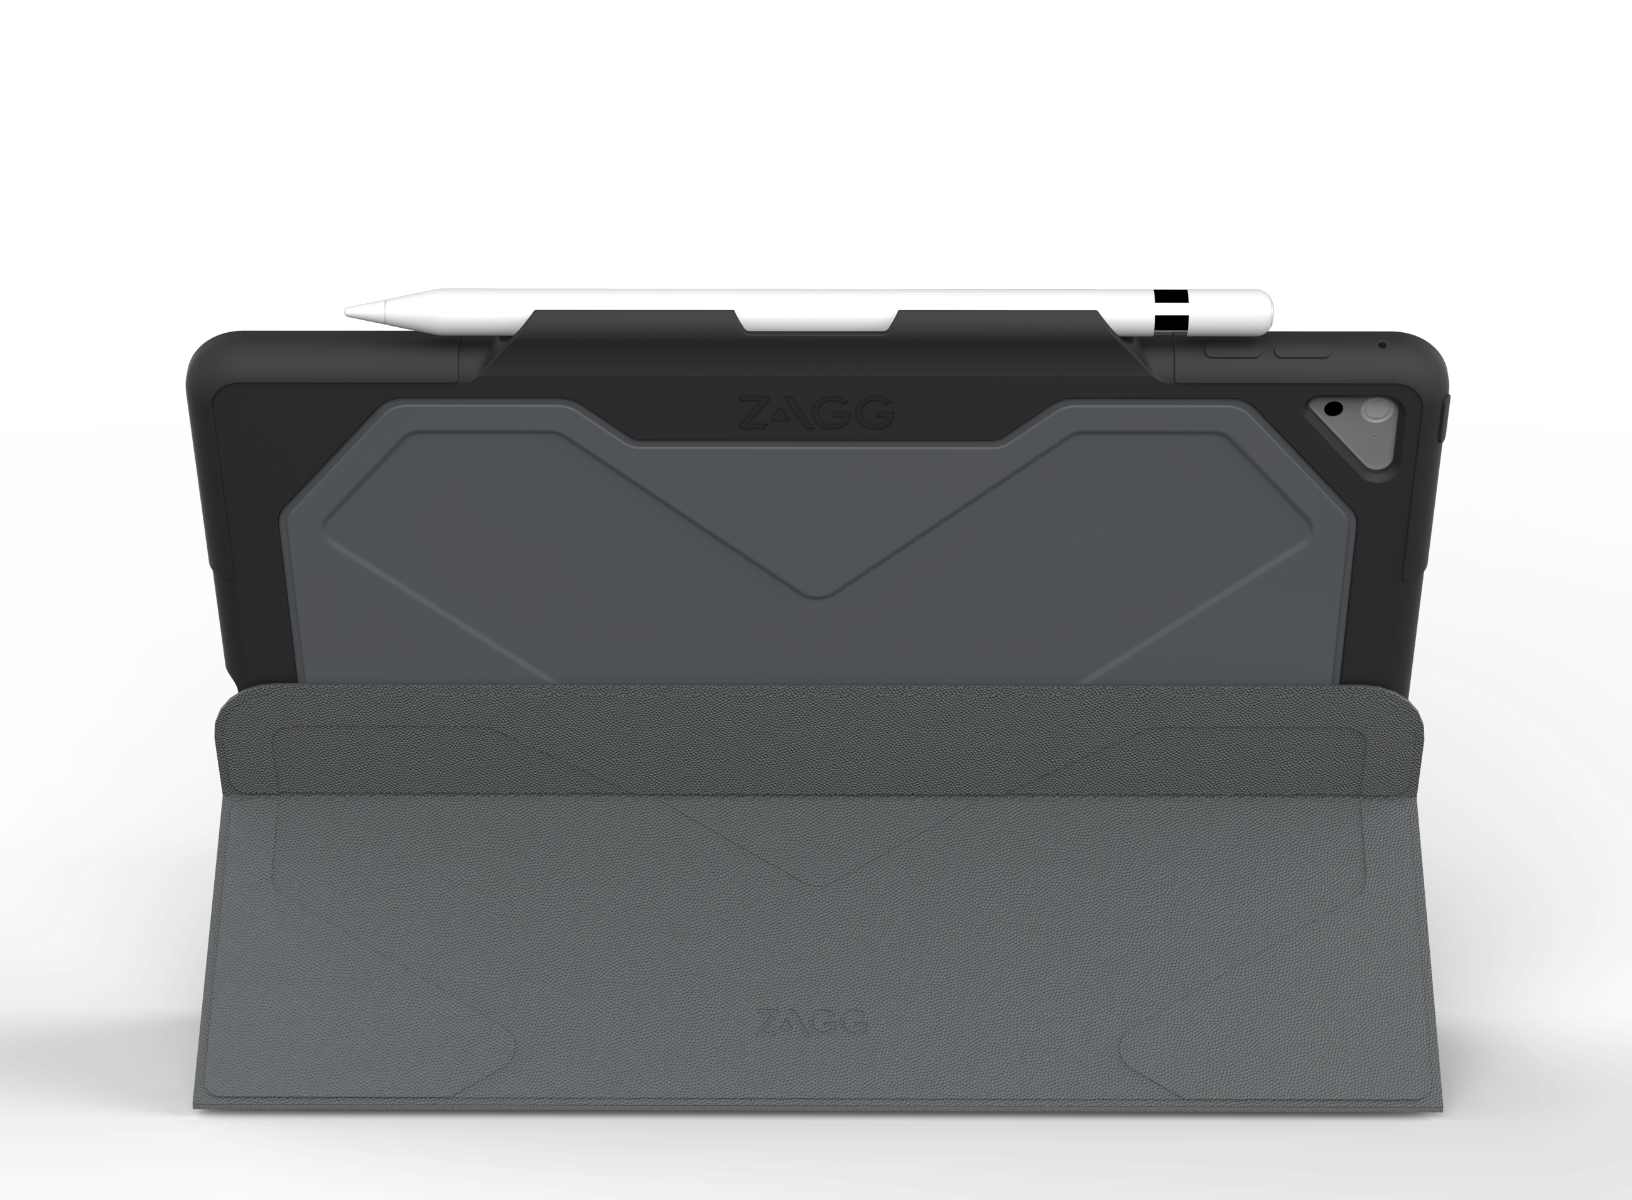 Rugged Messenger for the Apple iPad Pro 10.5-inch/10.5-inch (Air 3)